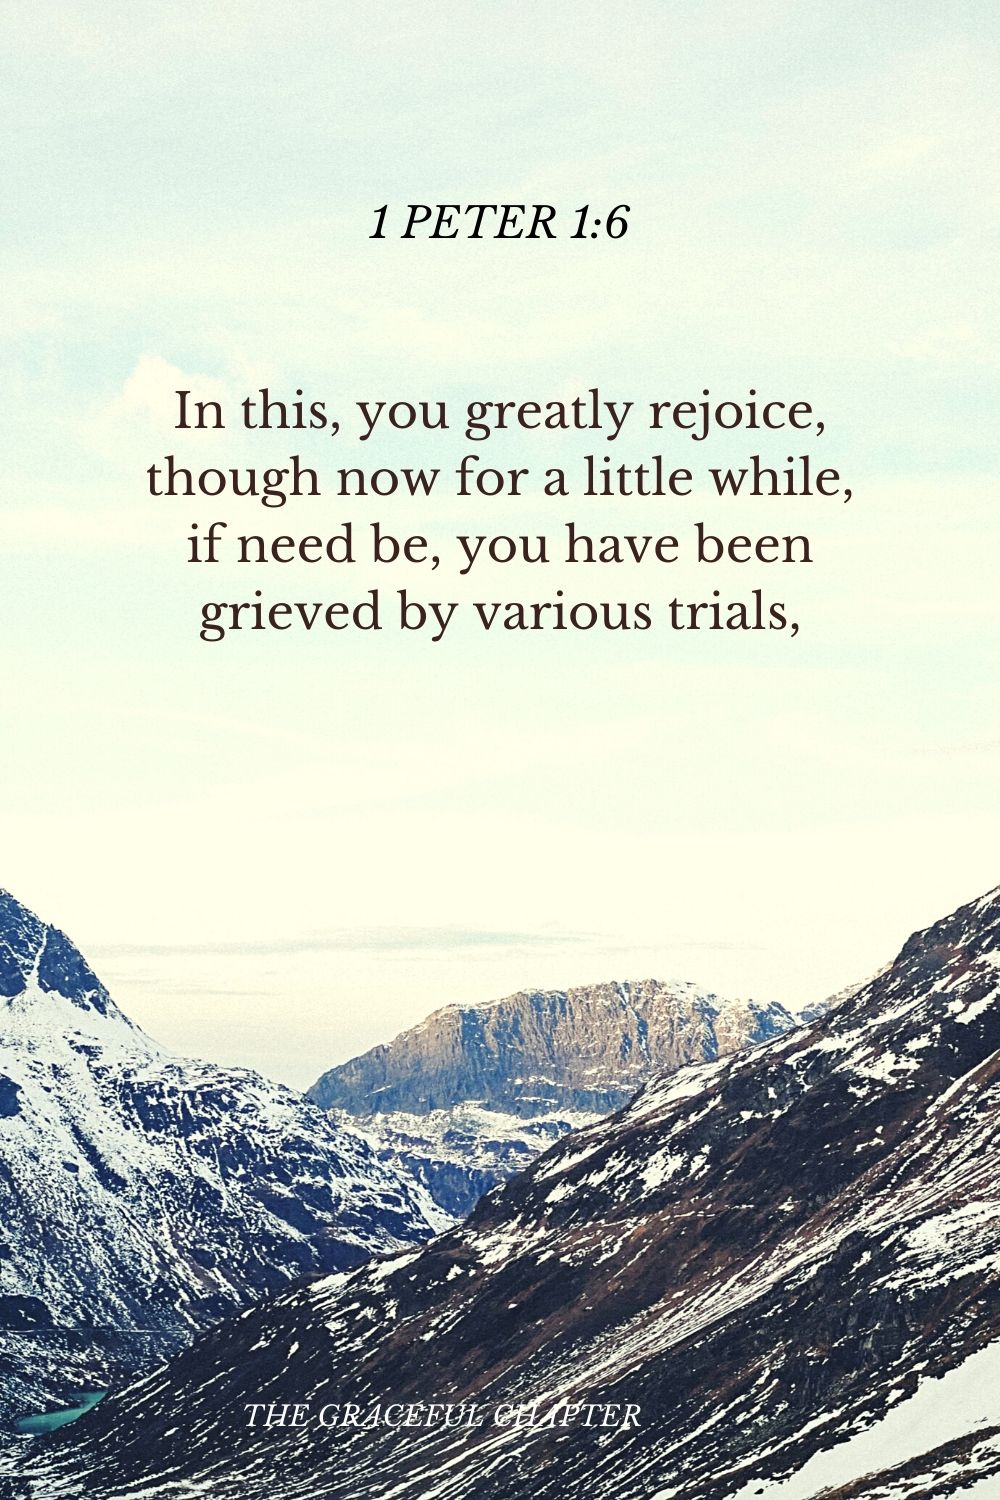 In this, you greatly rejoice, though now for a little while, if need be, you have been grieved by various trials, 1 Peter 1:6